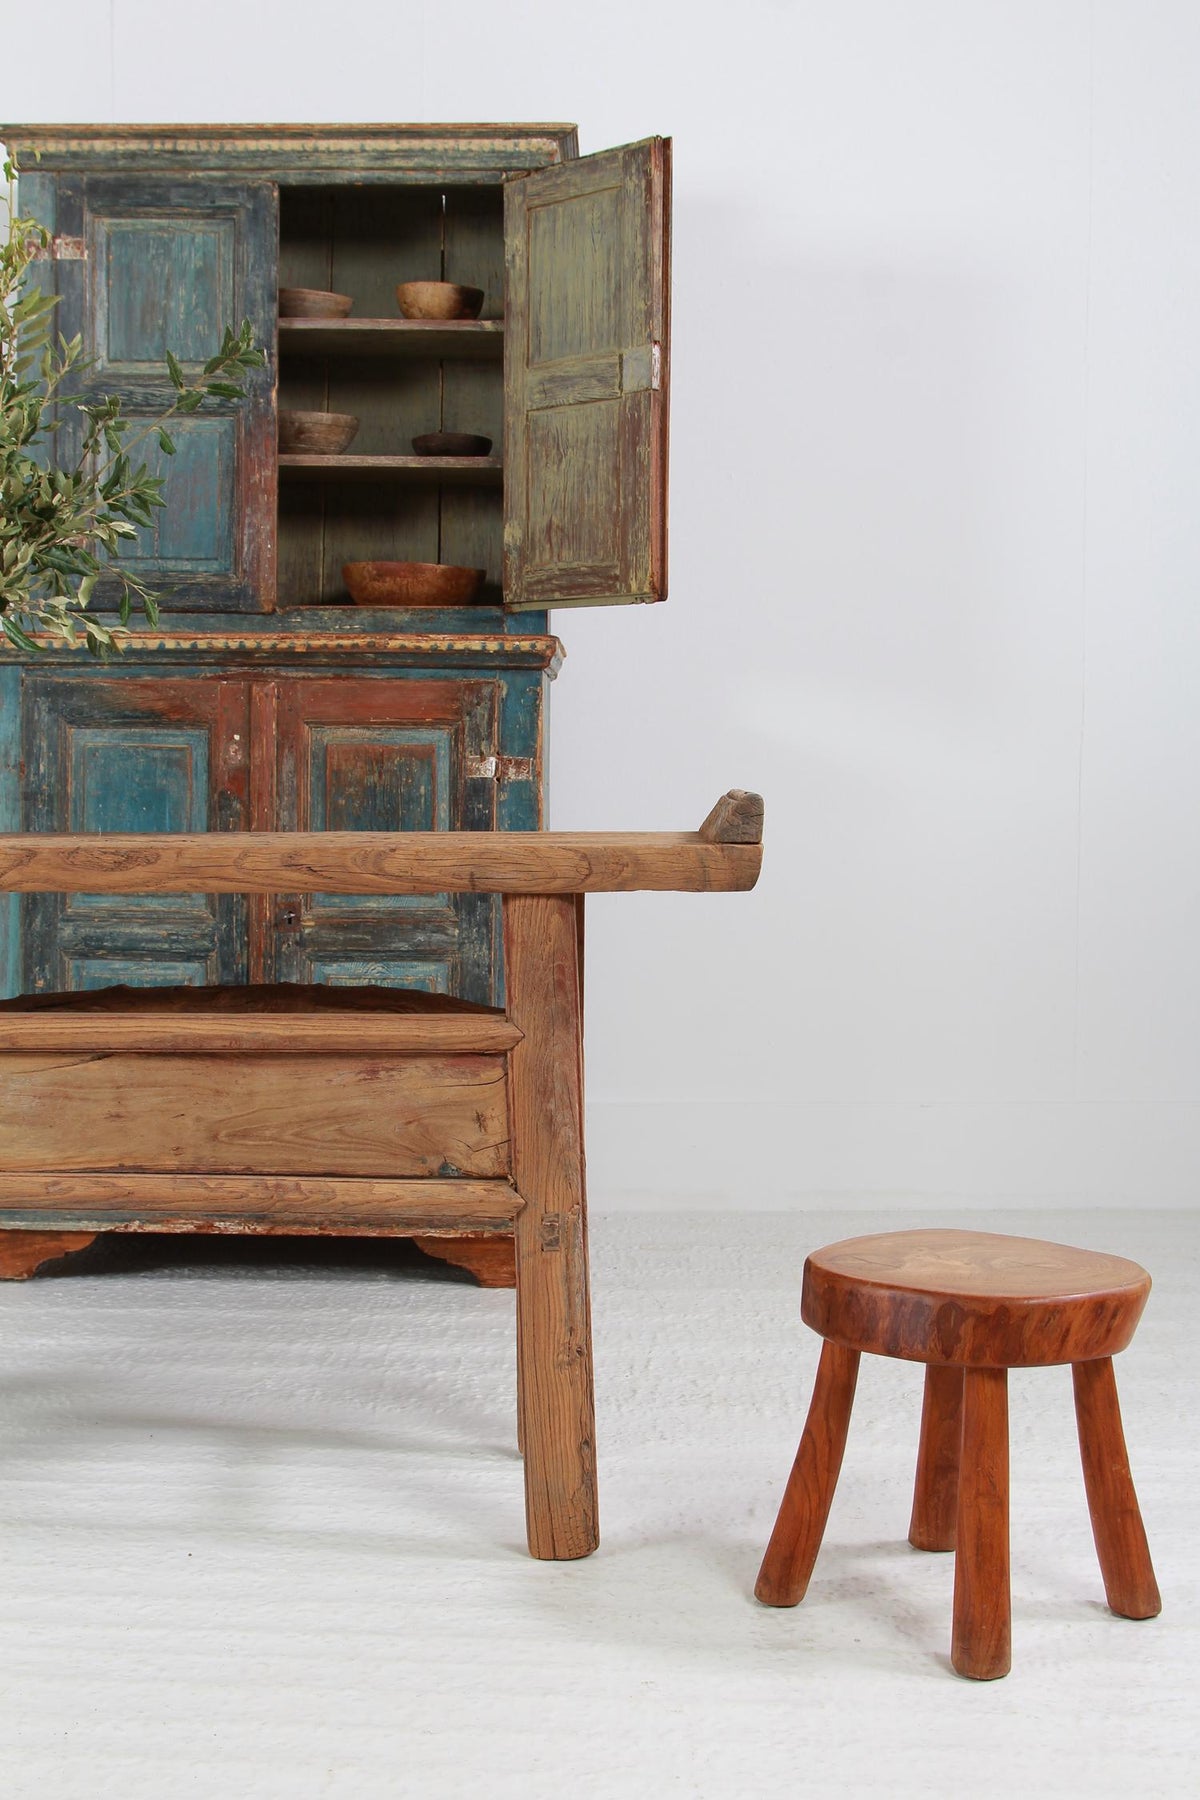 RUSTIC 18THC WABI-SABI  ELM CONSOLE  ALTAR  TABLE WITH charismatic patina